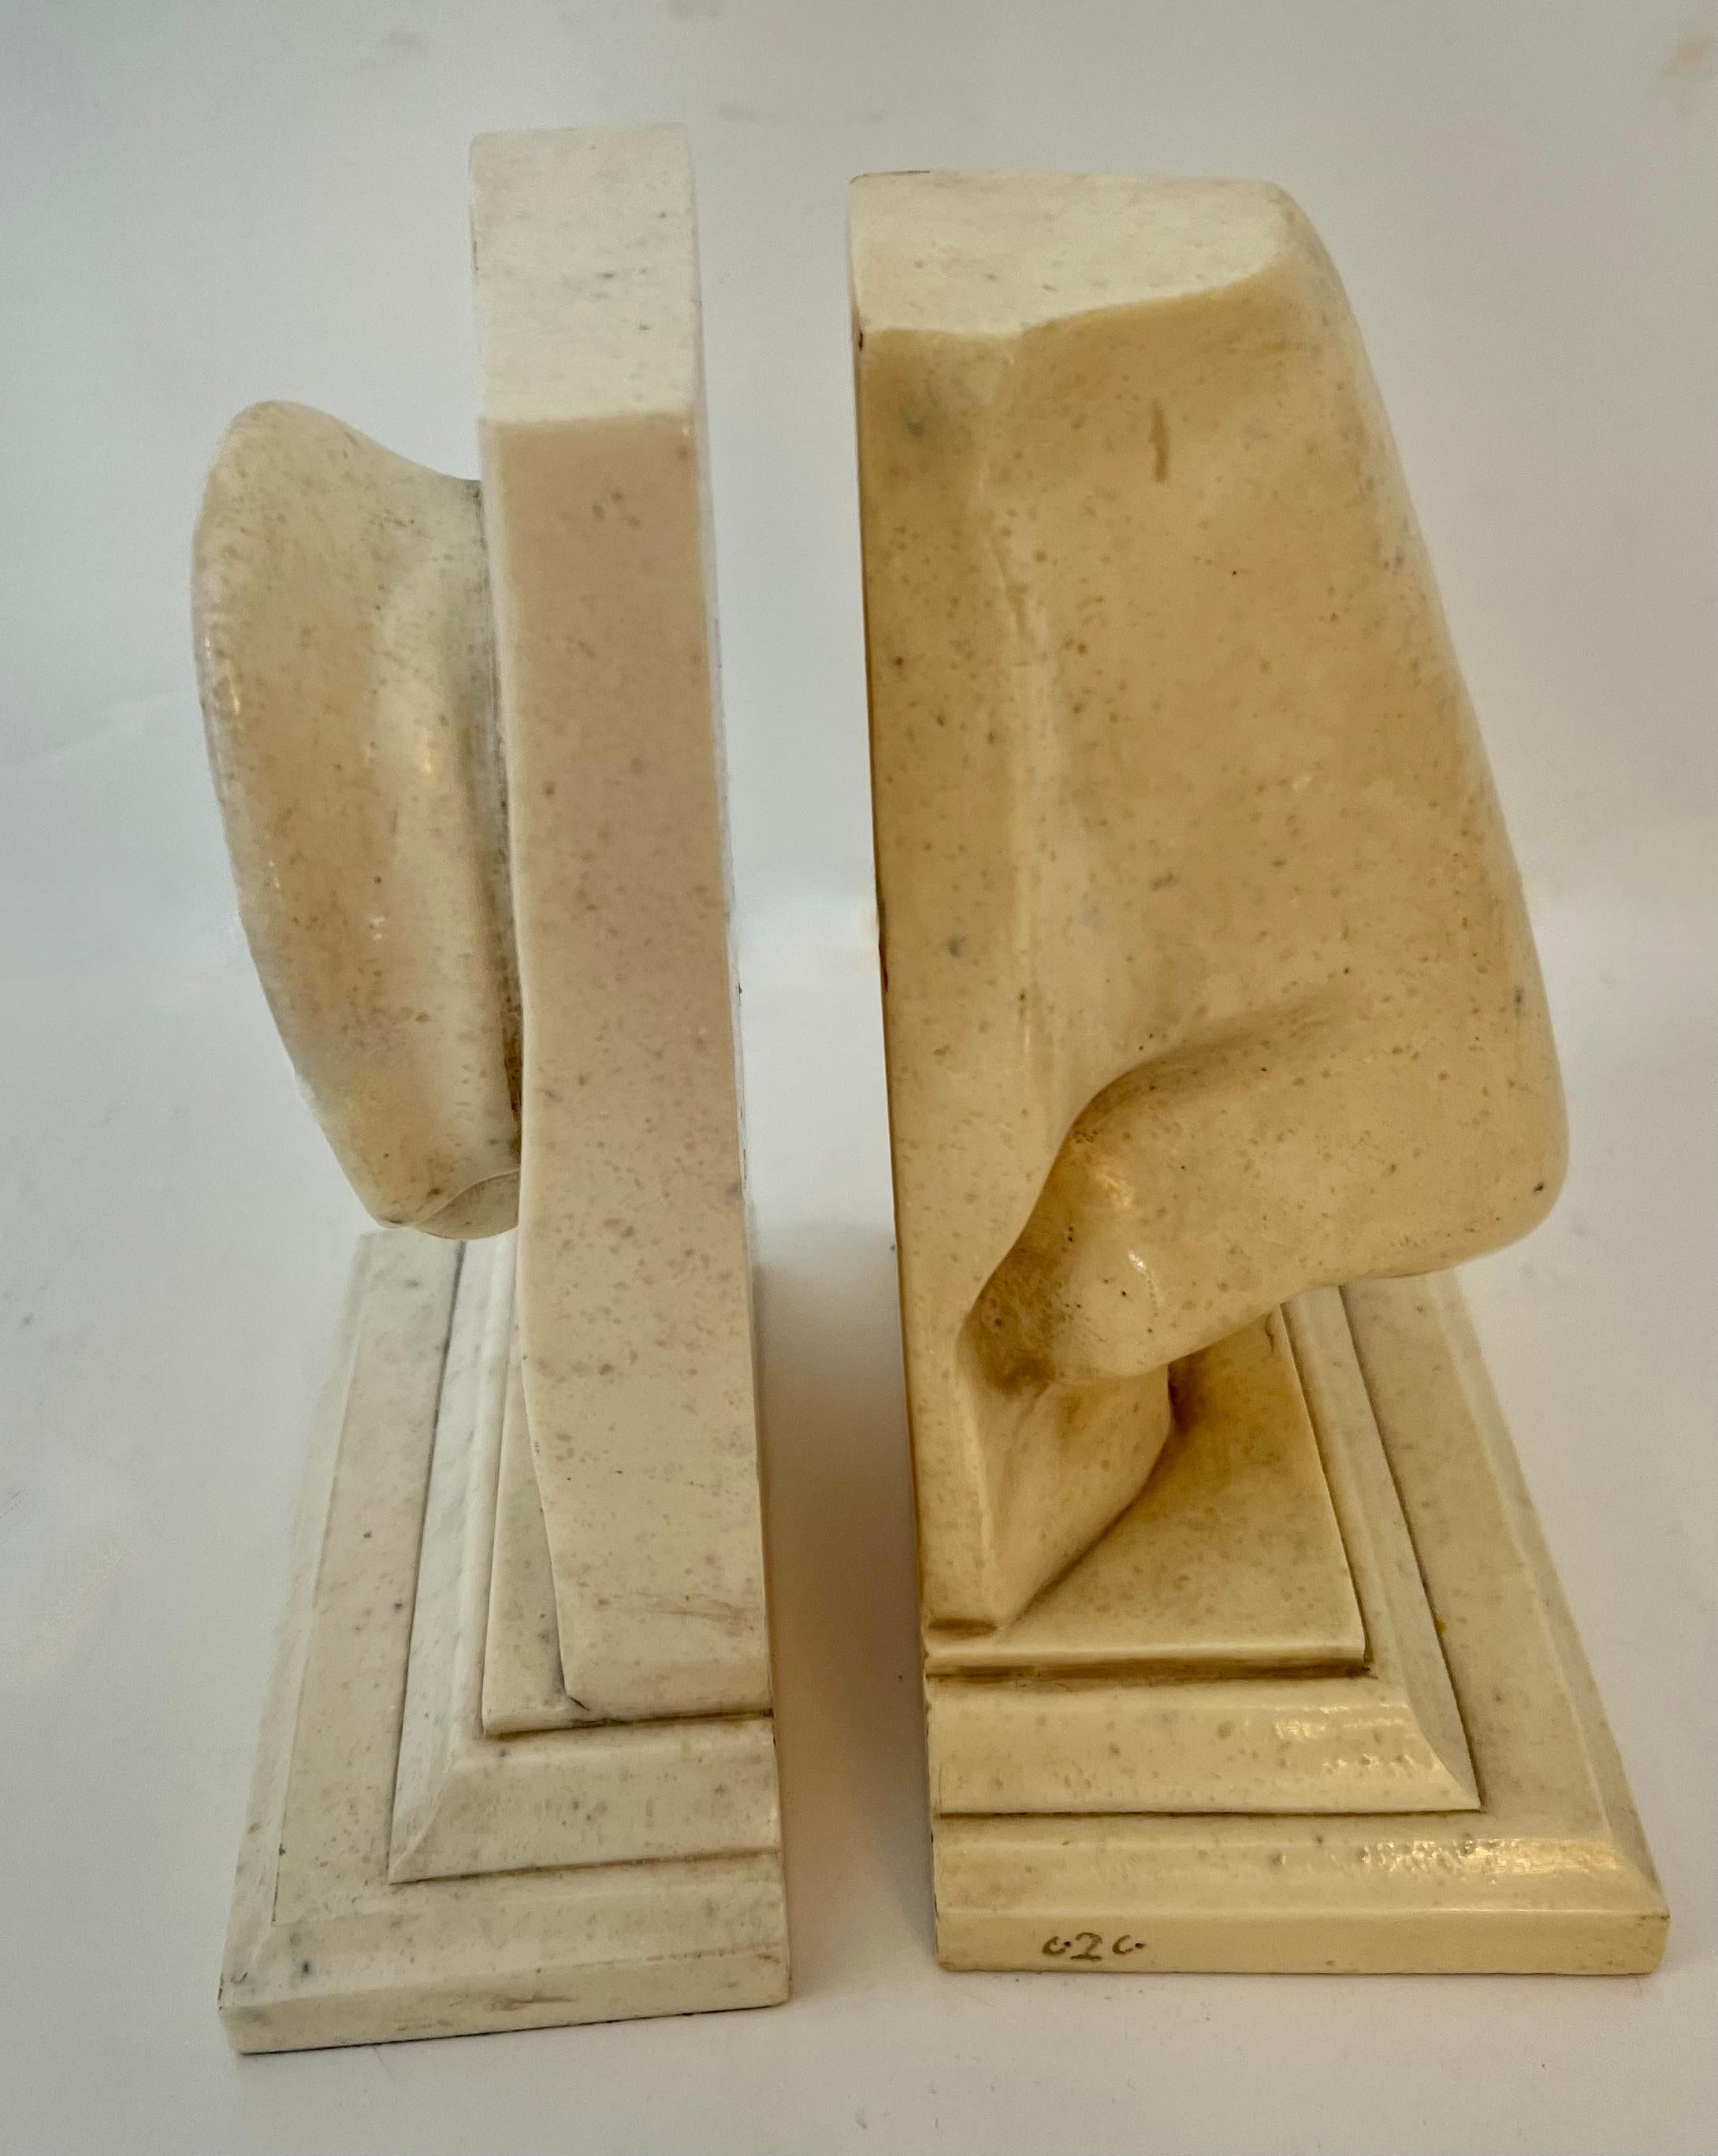 Acrylic Pair of C2C Designs, a Resin Based Sculptural Ear and Nose Bookend Set For Sale